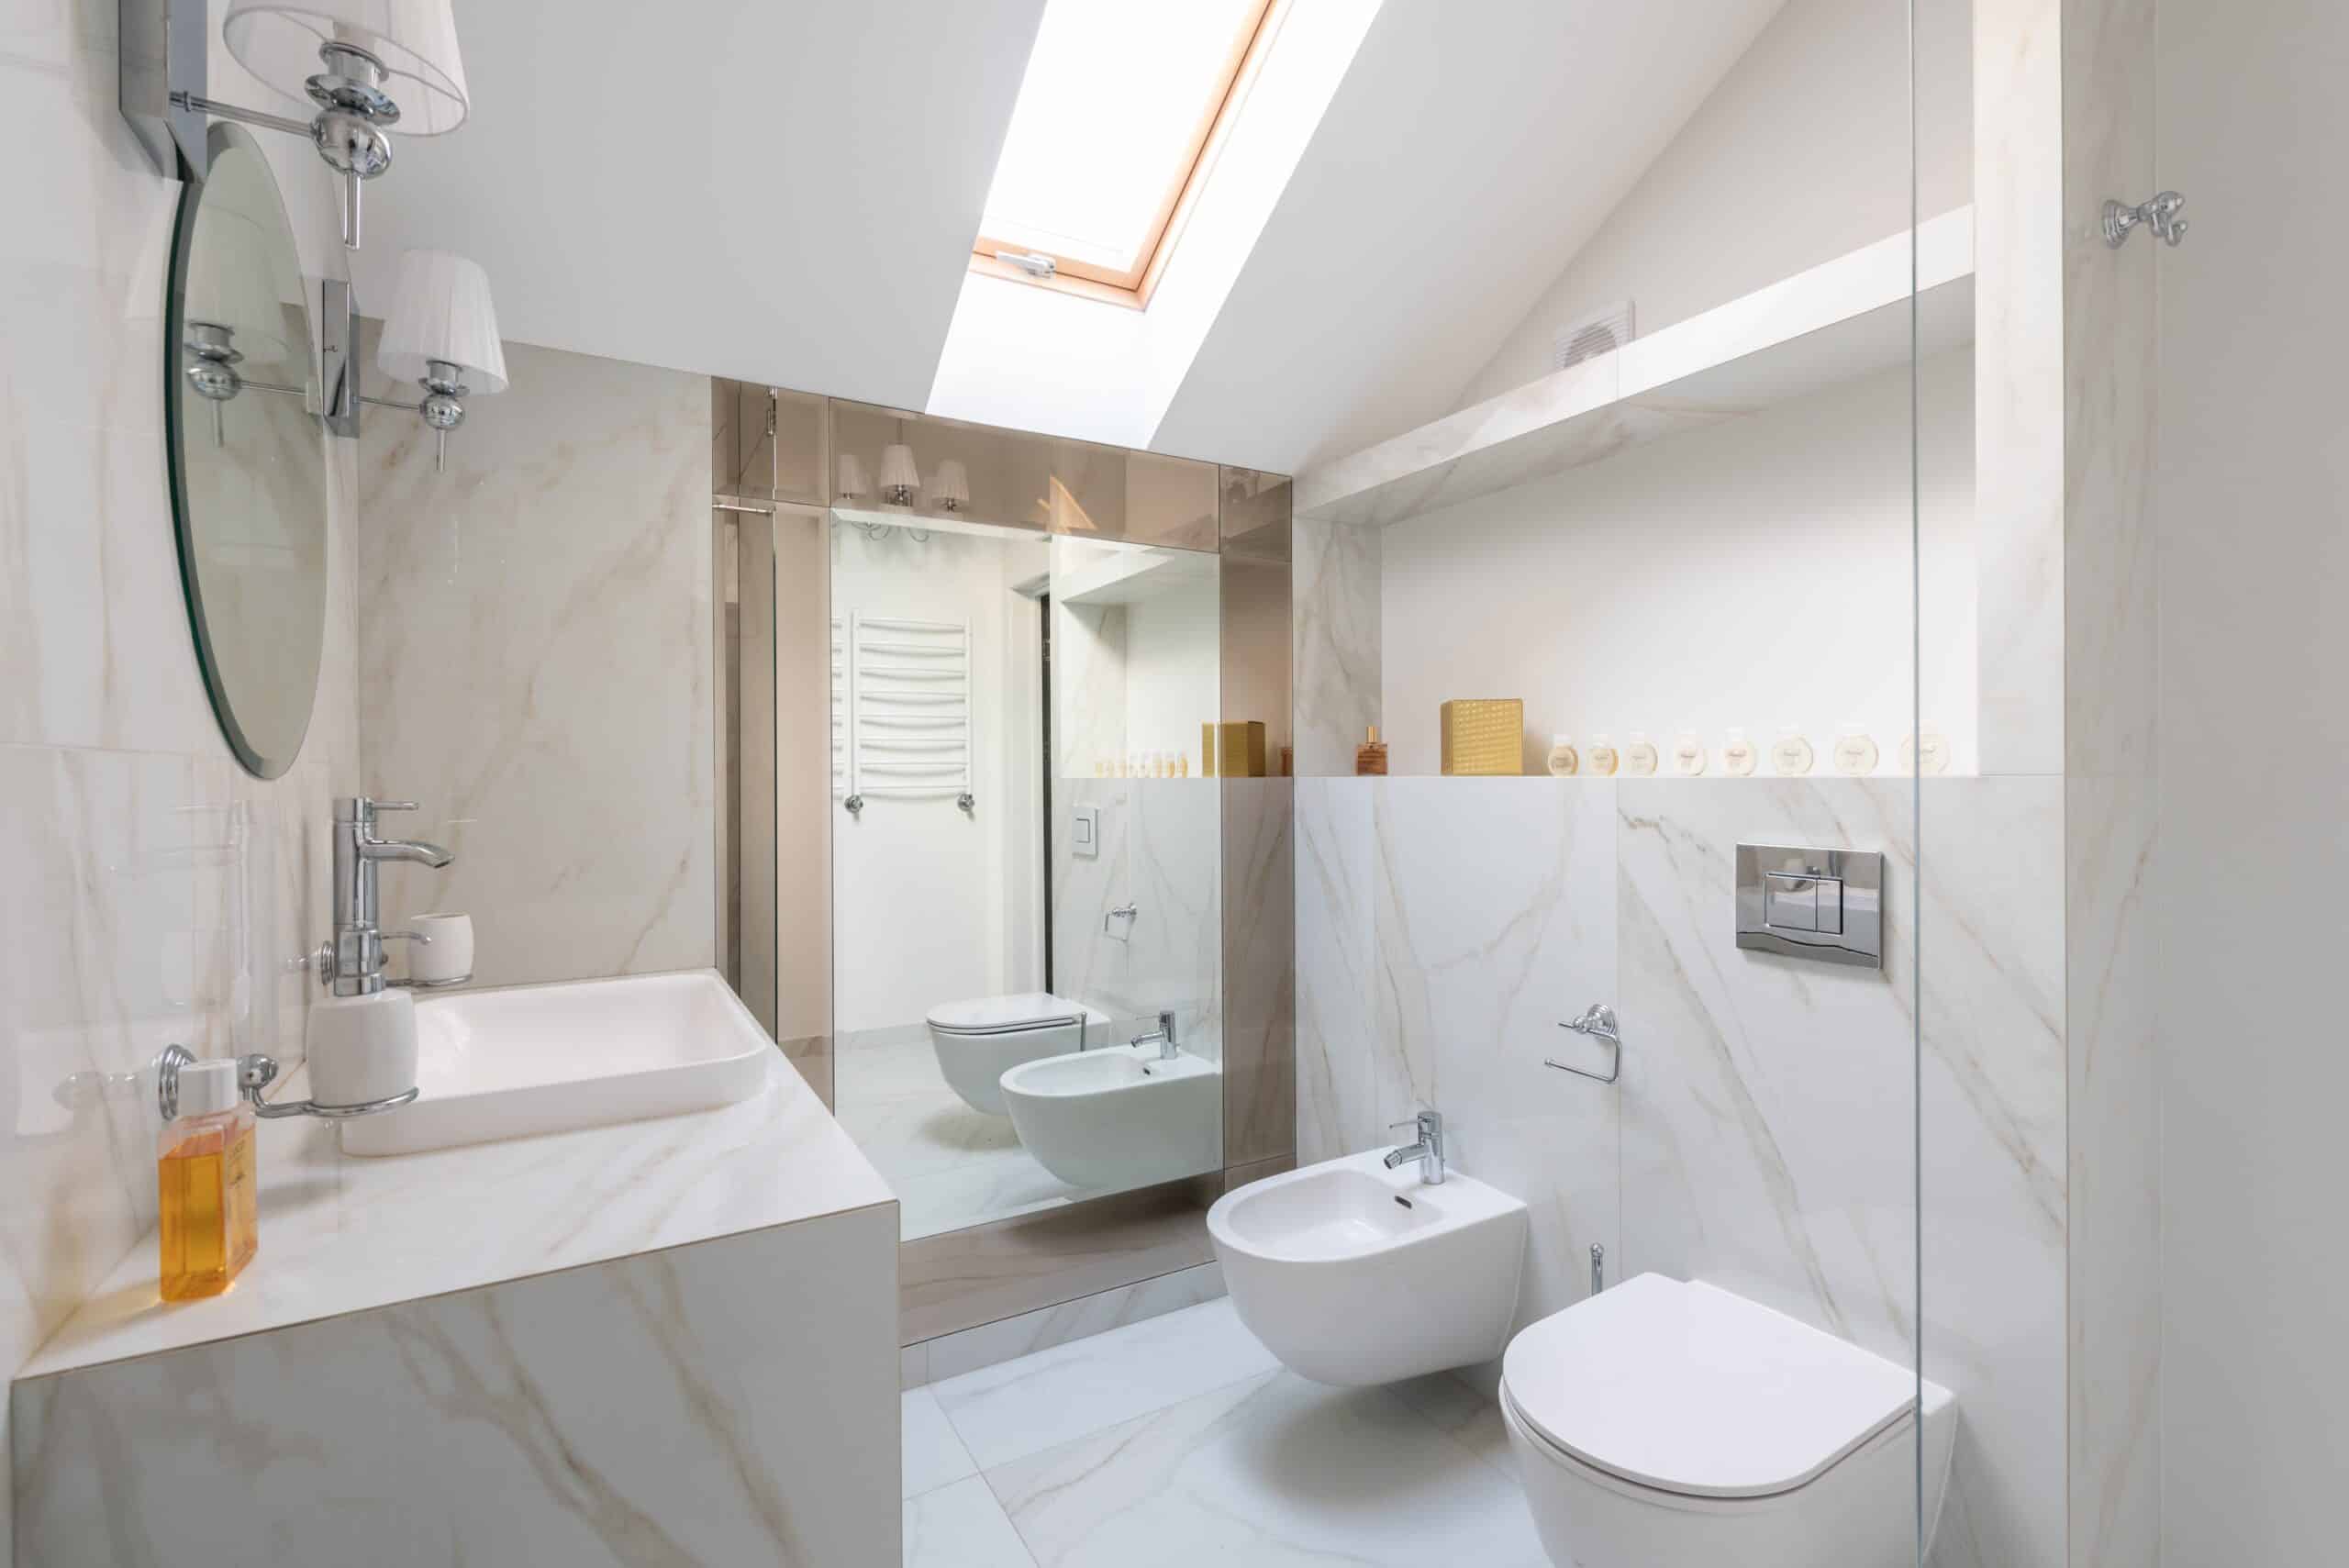 Choosing the Right Toilet For Your Bathroom Remodel